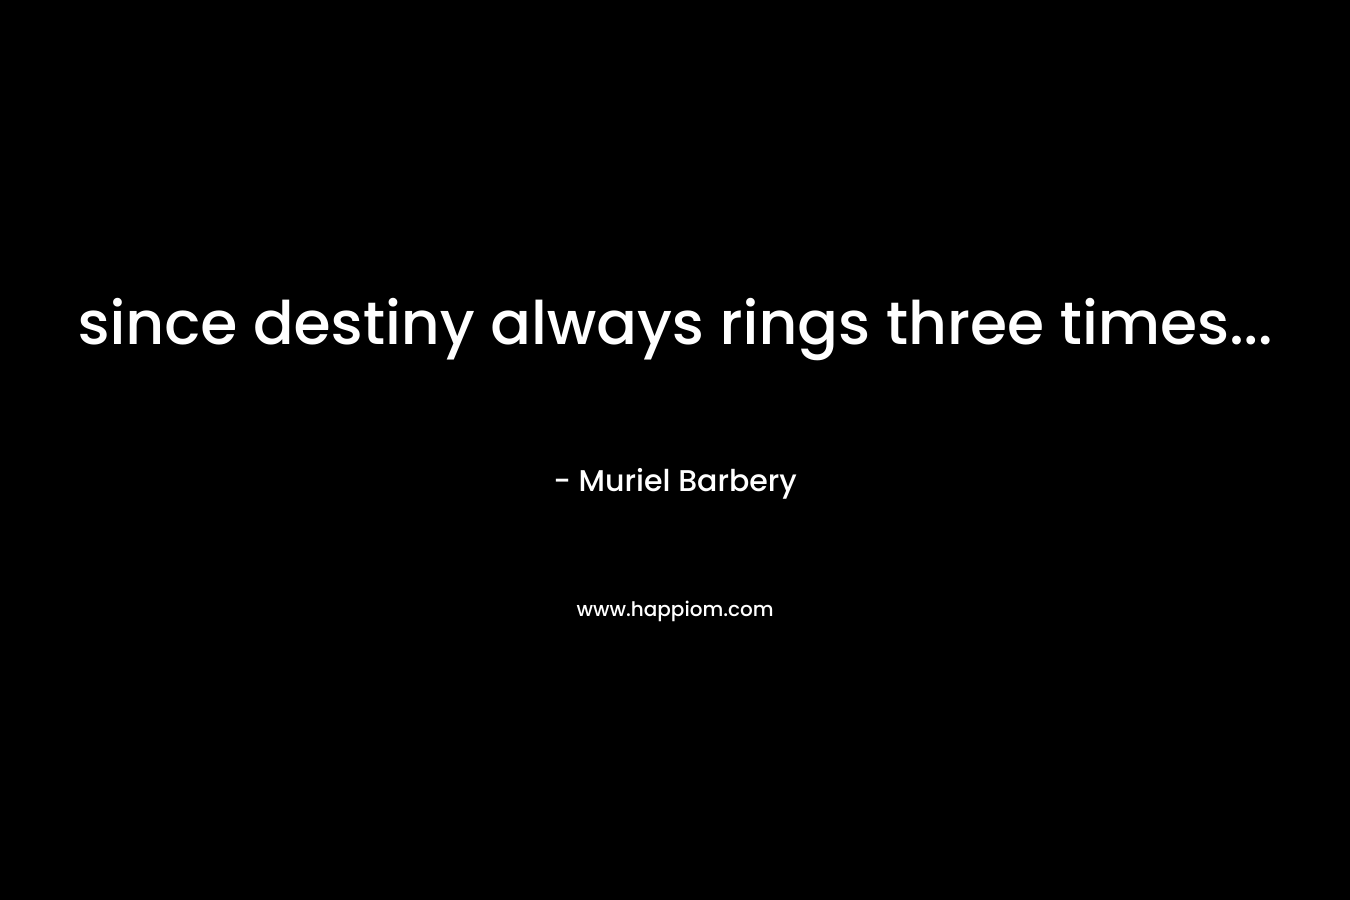 since destiny always rings three times...